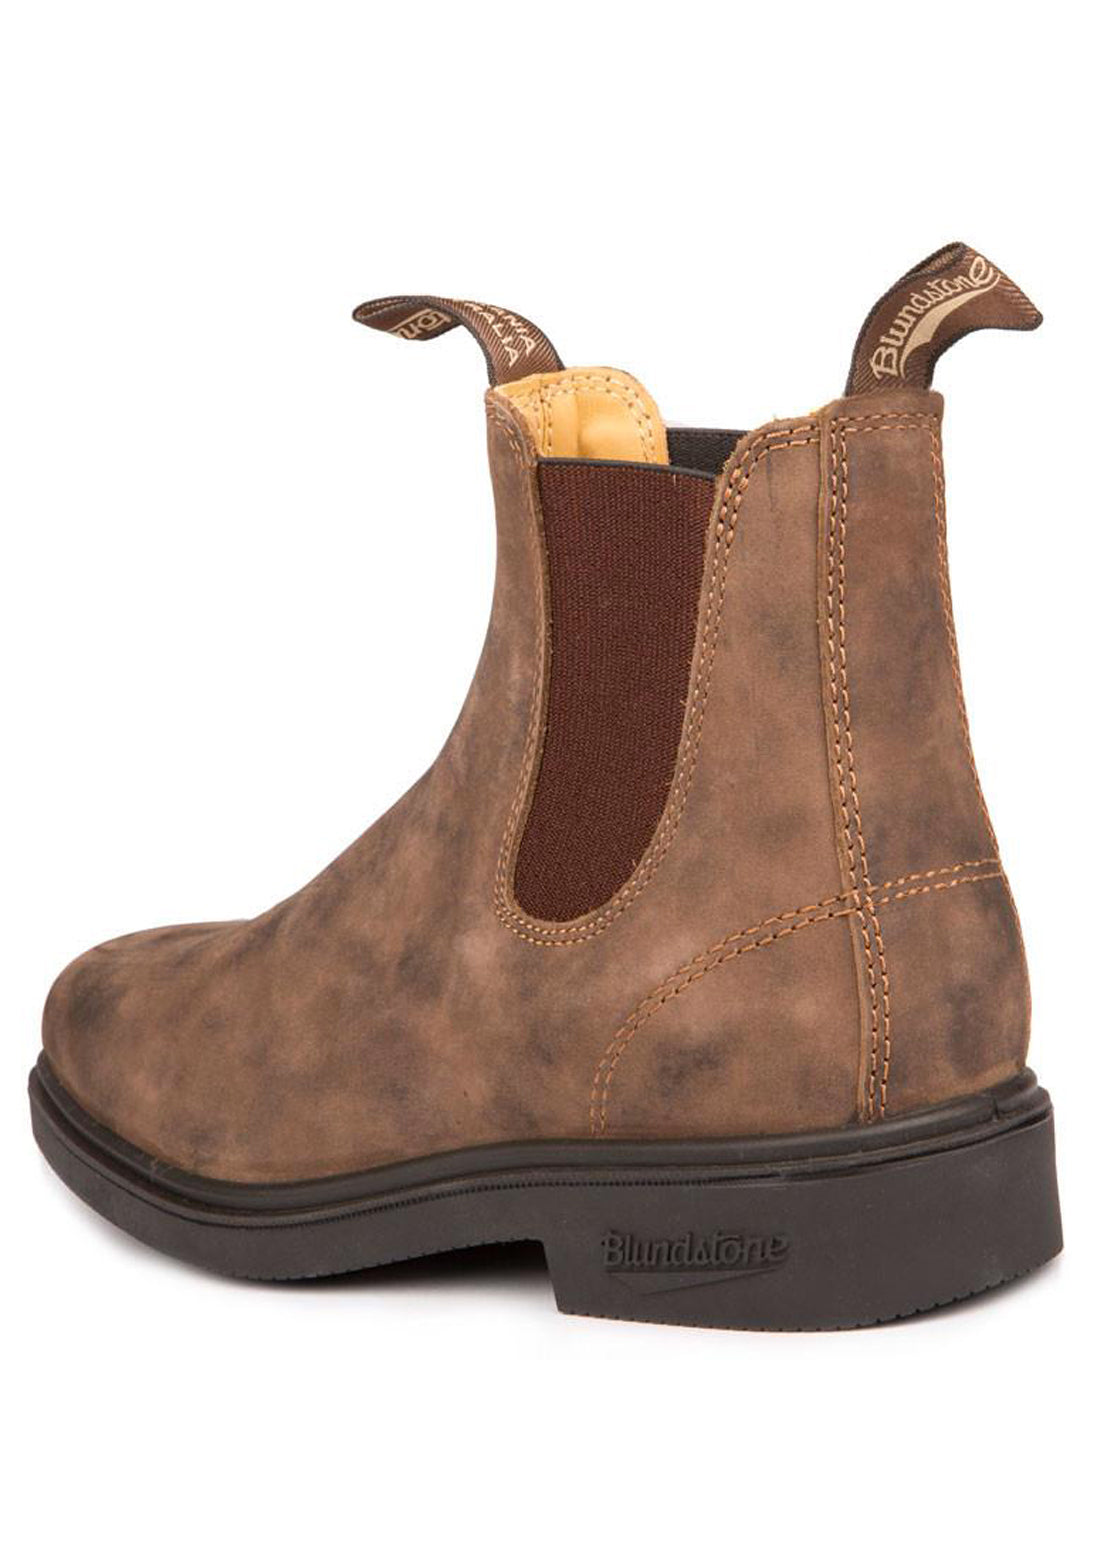 Blundstone 1306 Chisel Toe Boots (1306) Rustic Brown